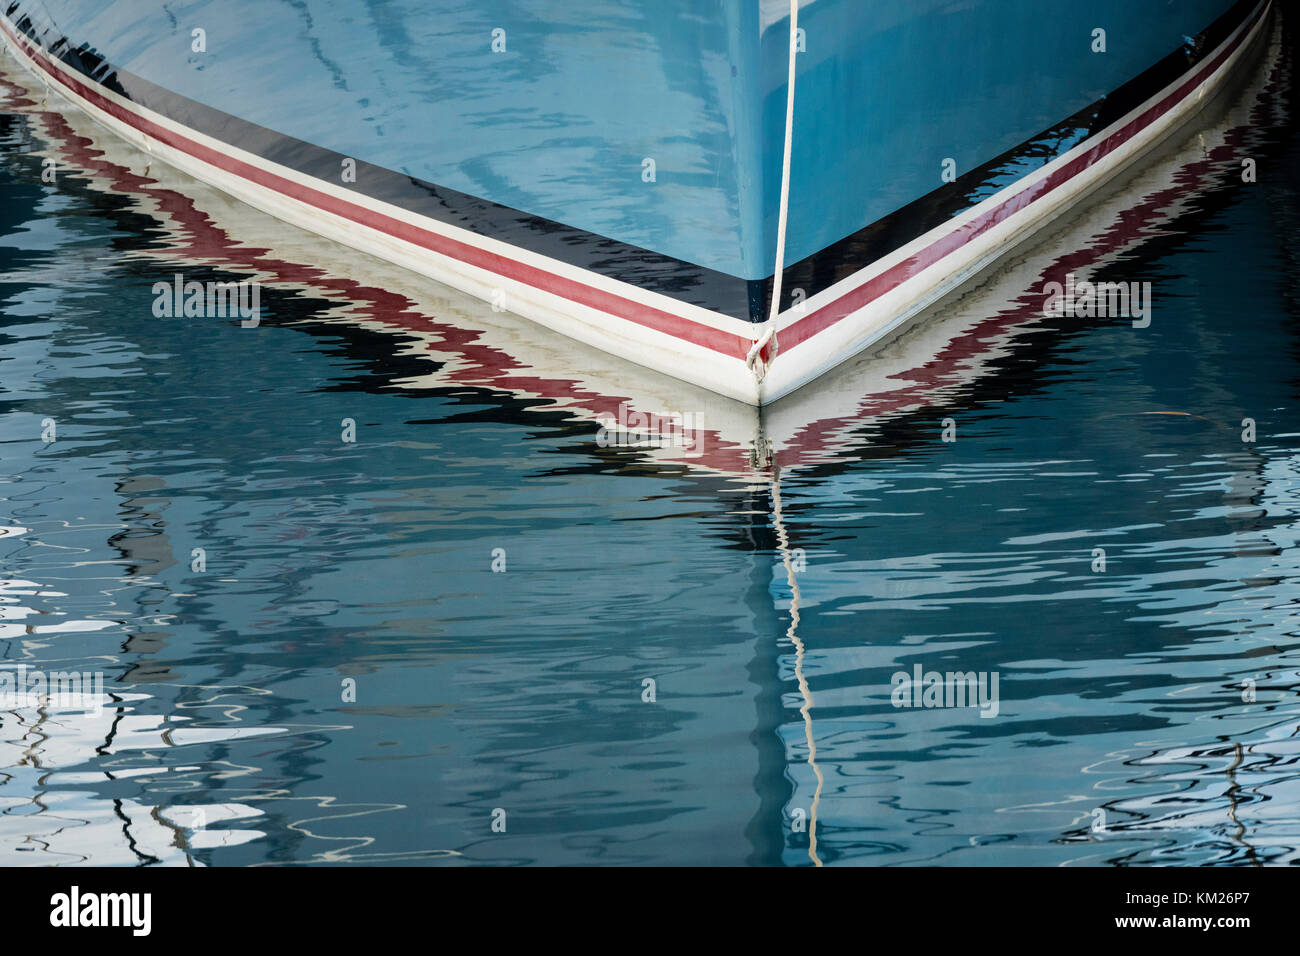 Waterline reflections of a fibreglass sailing yacht. Stock Photo